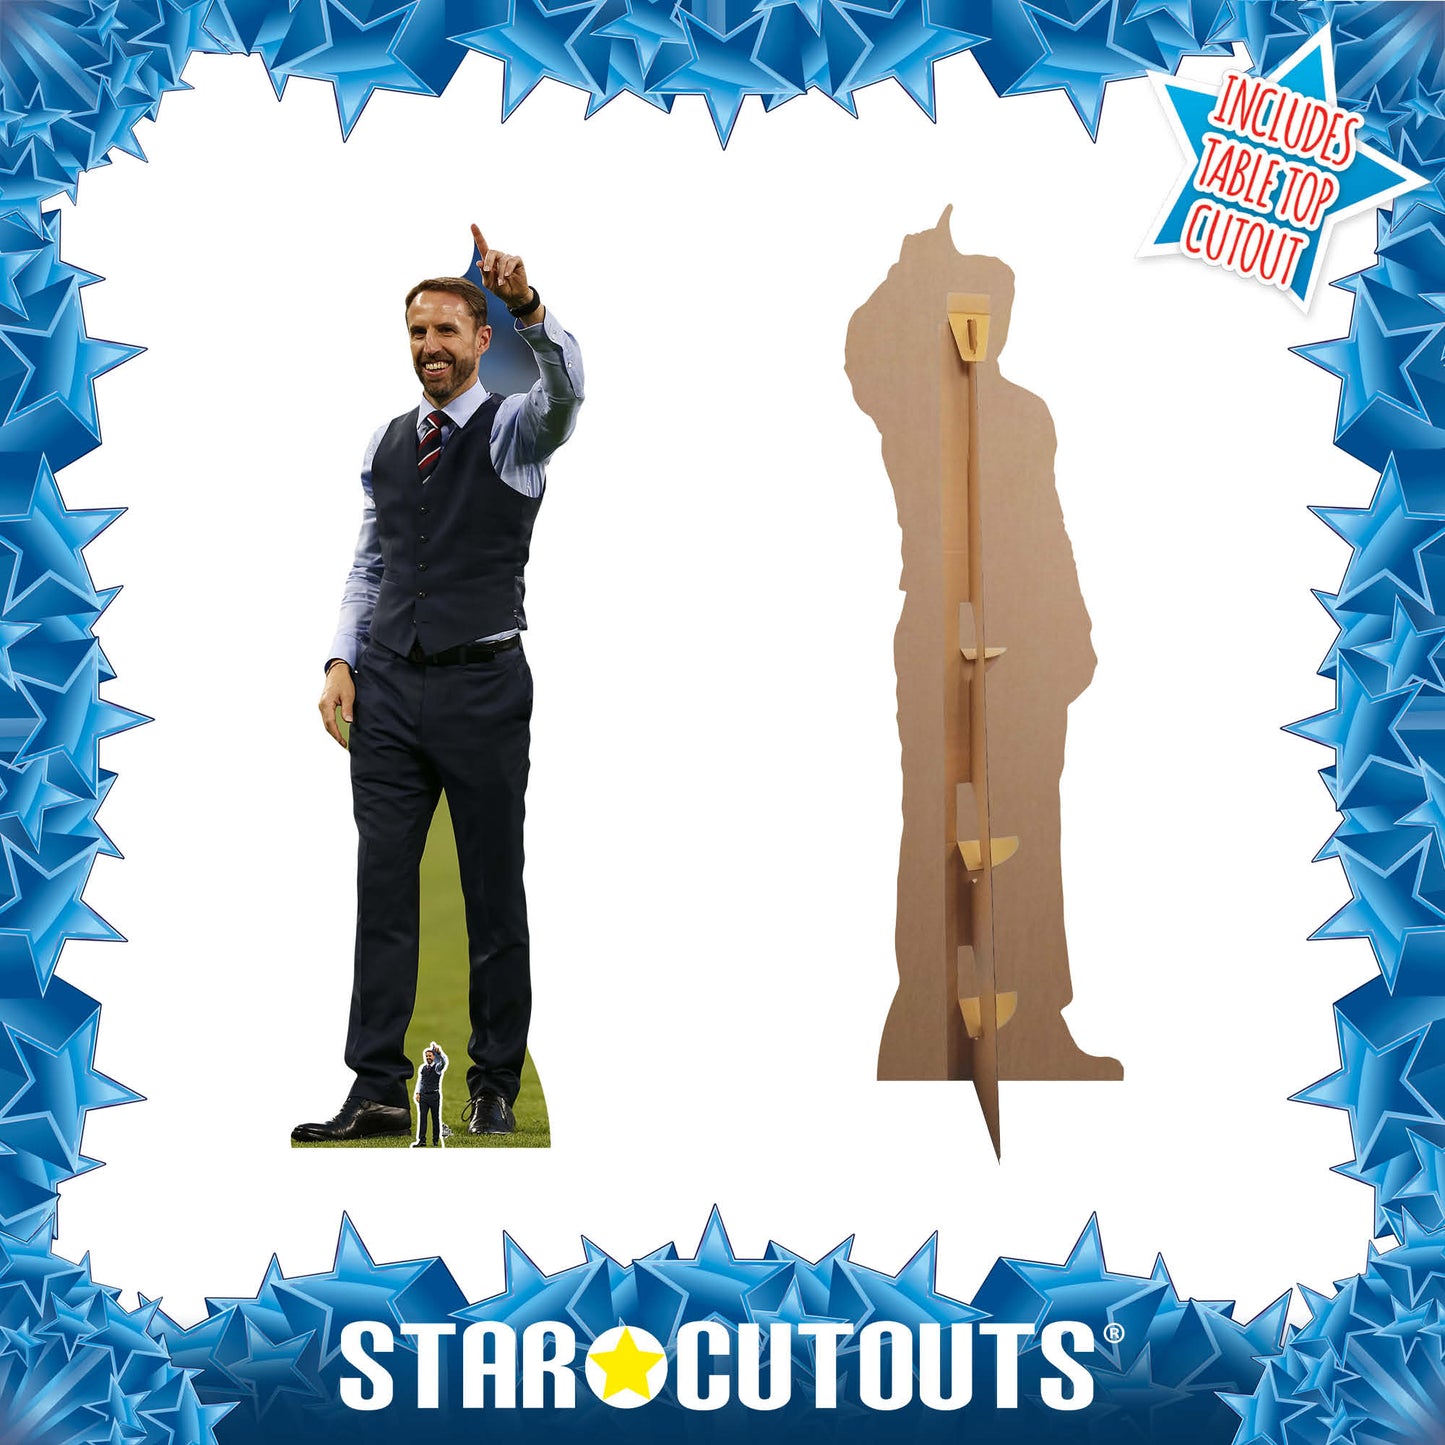 CS755 Gareth Southgate Height 193cm Lifesize Cardboard Cut Out With Mini